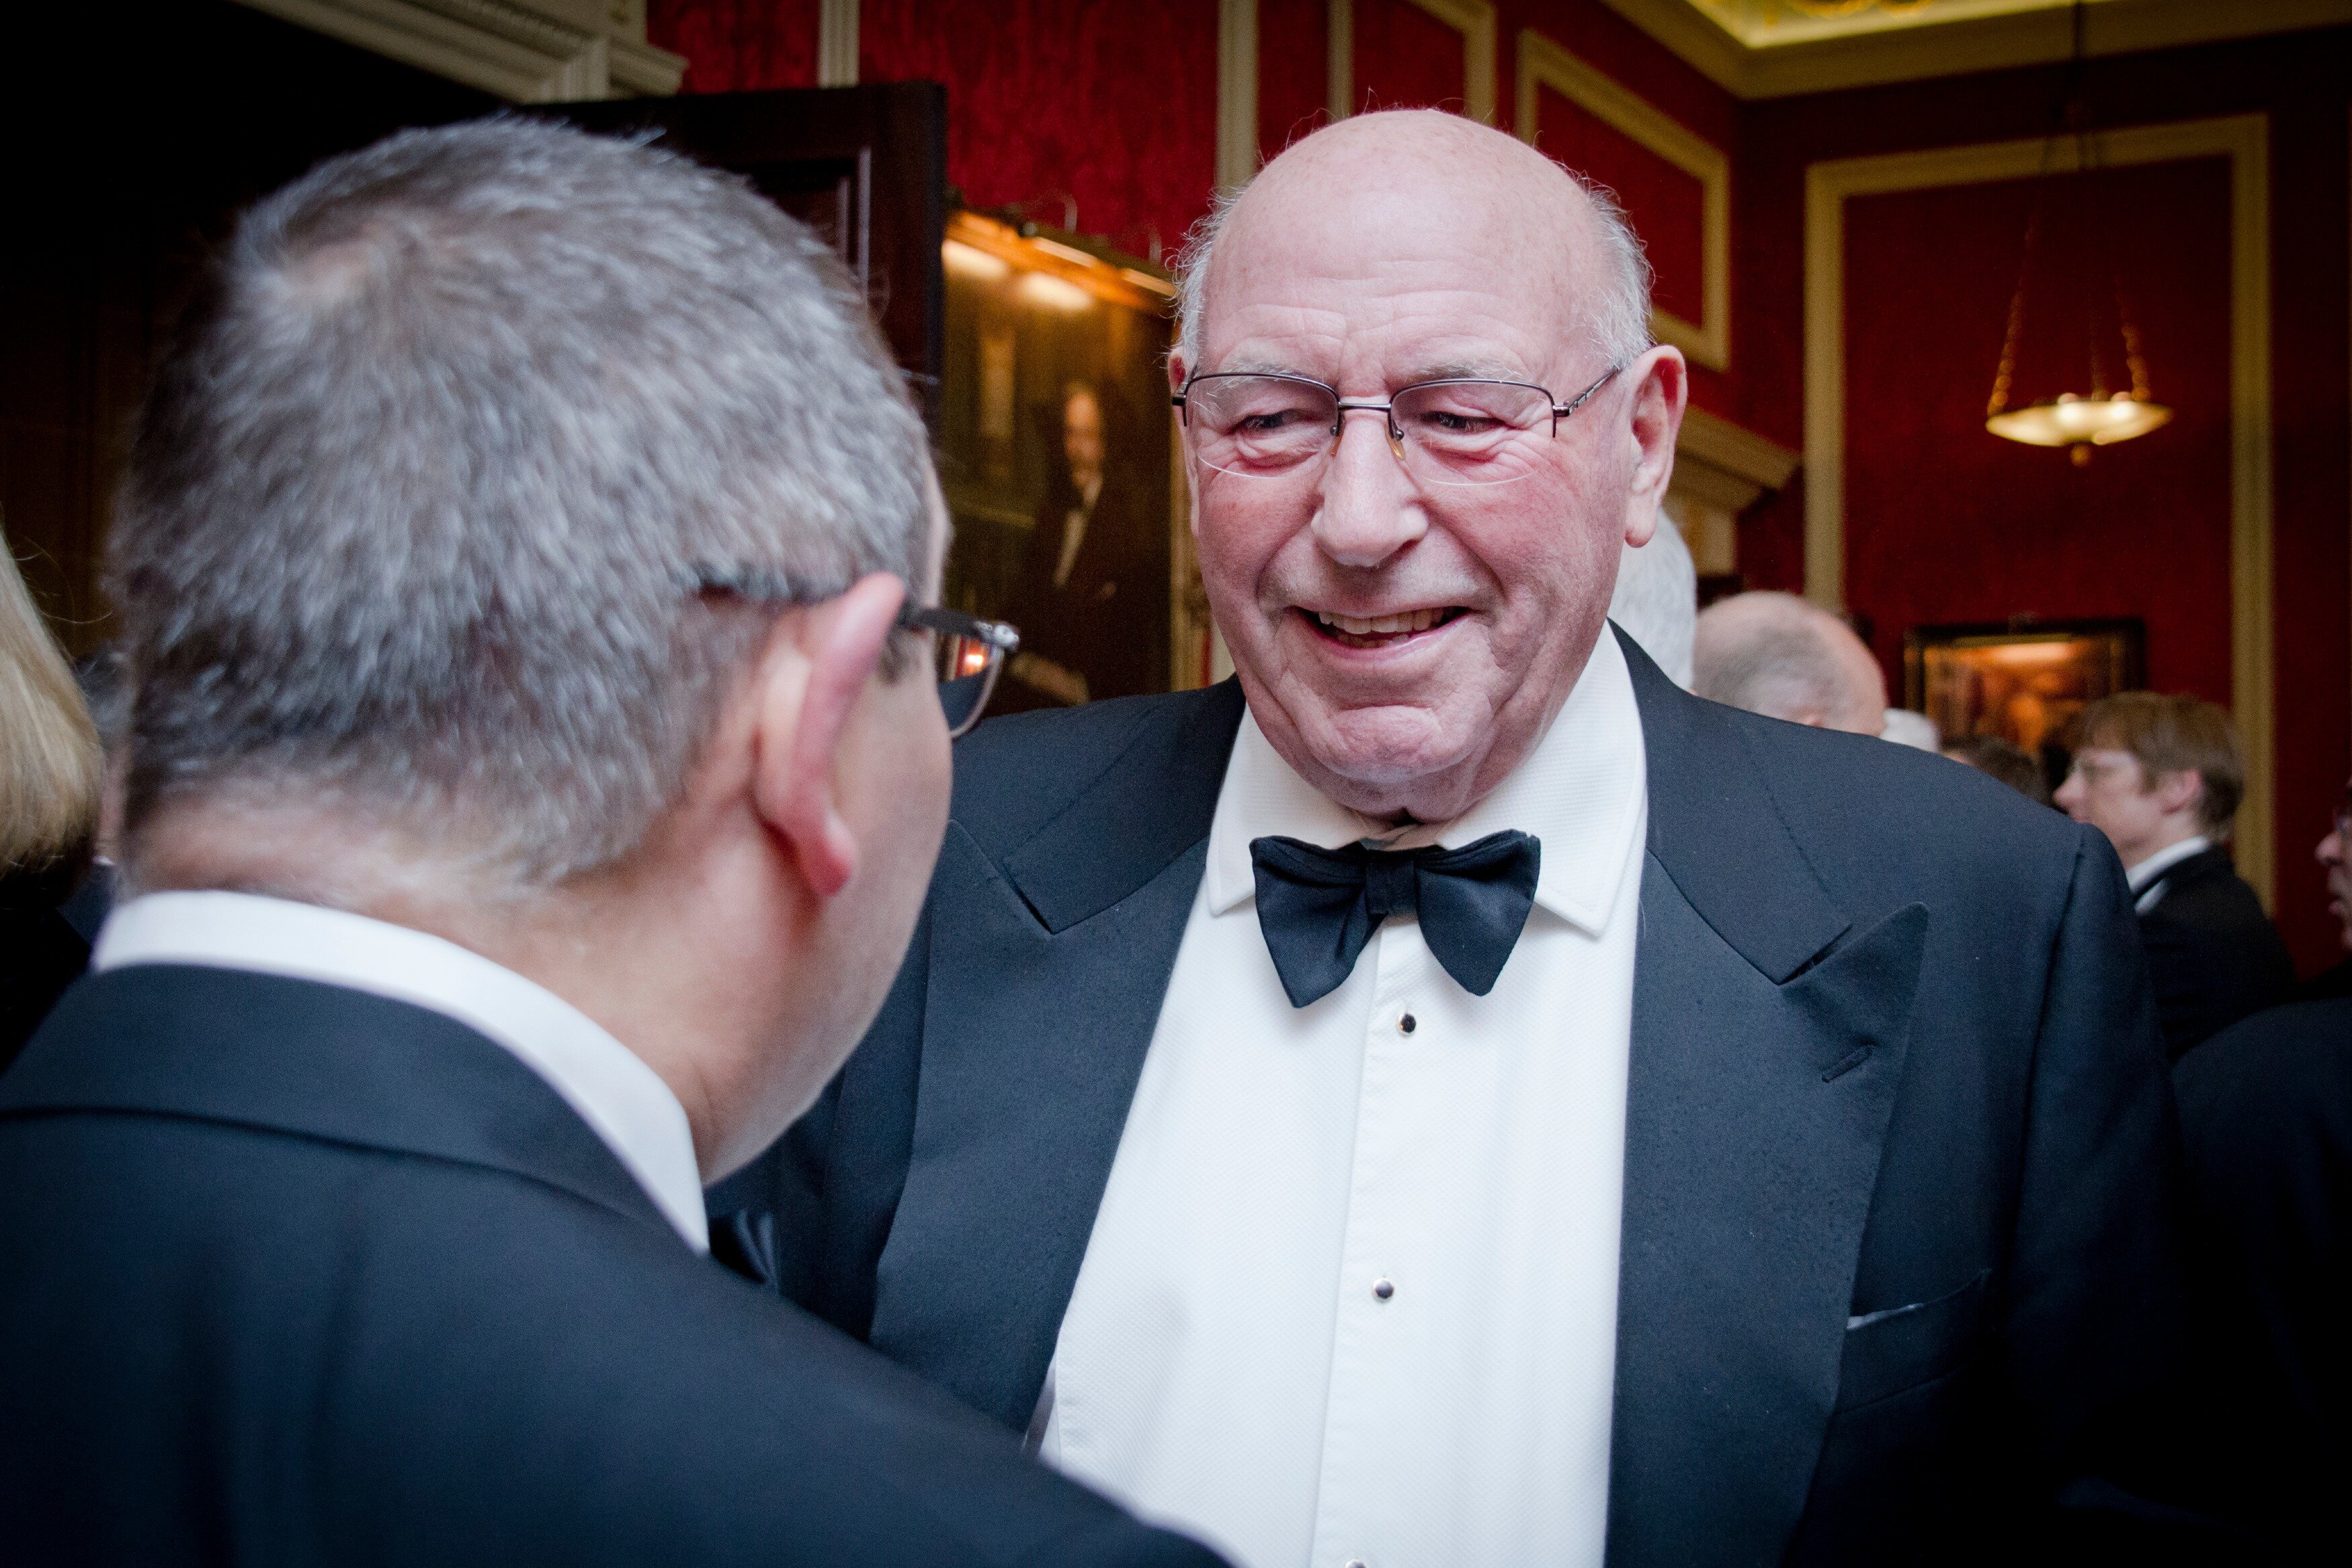 Tributes paid to ‘giant of the hospitality industry’ Marc Verstringhe